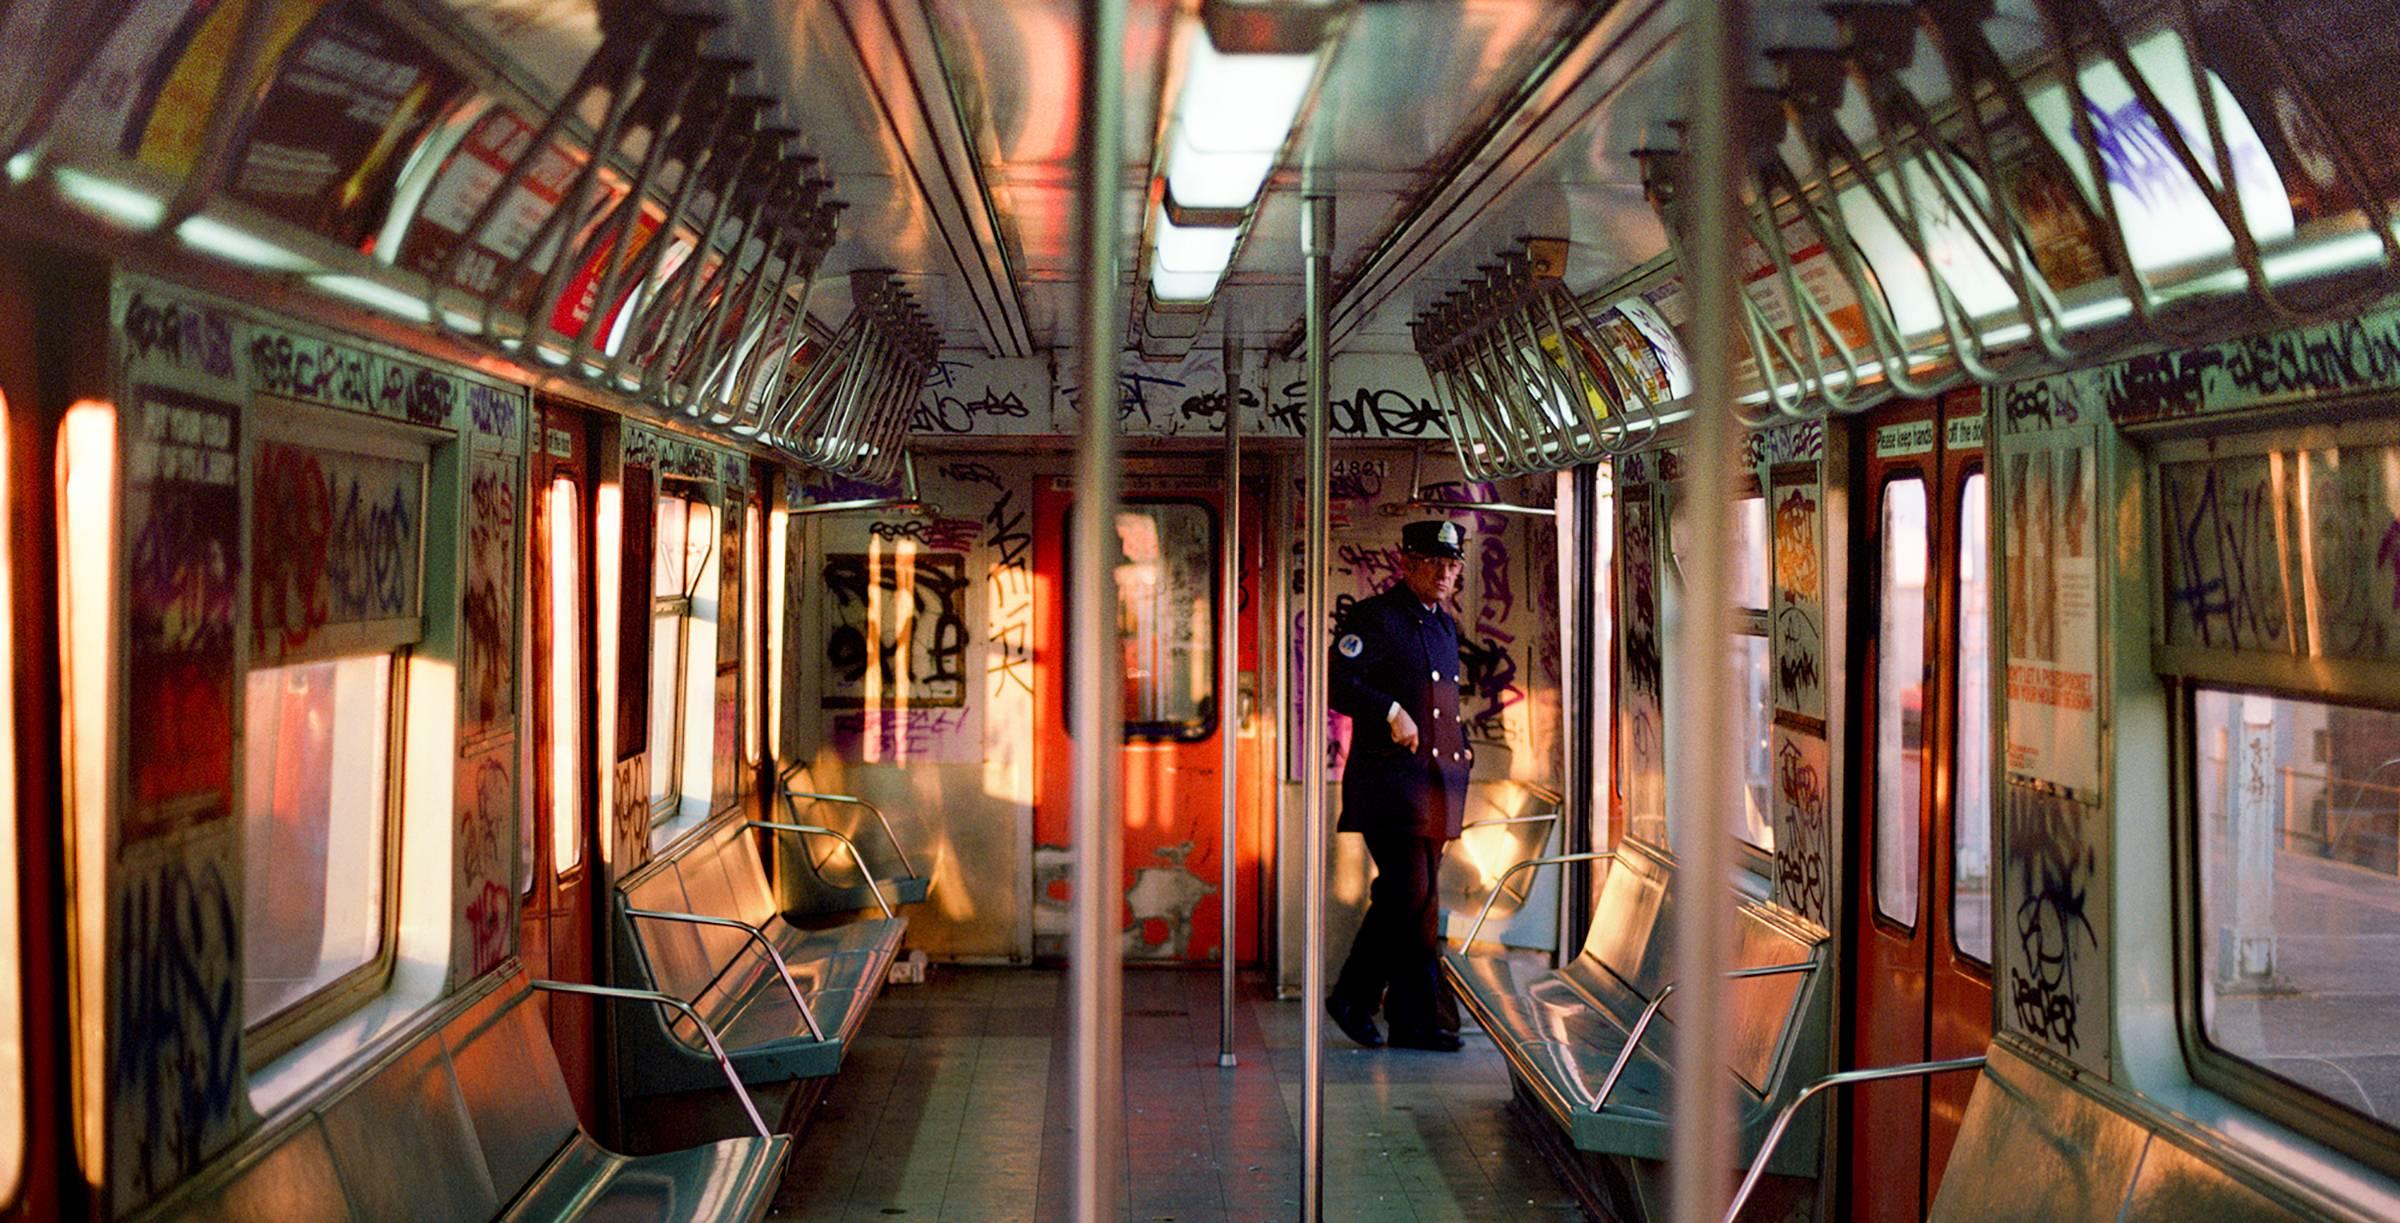 Robert Herman Color Photograph - 'Train Conductor' New York City, 1985 (The New Yorkers) 